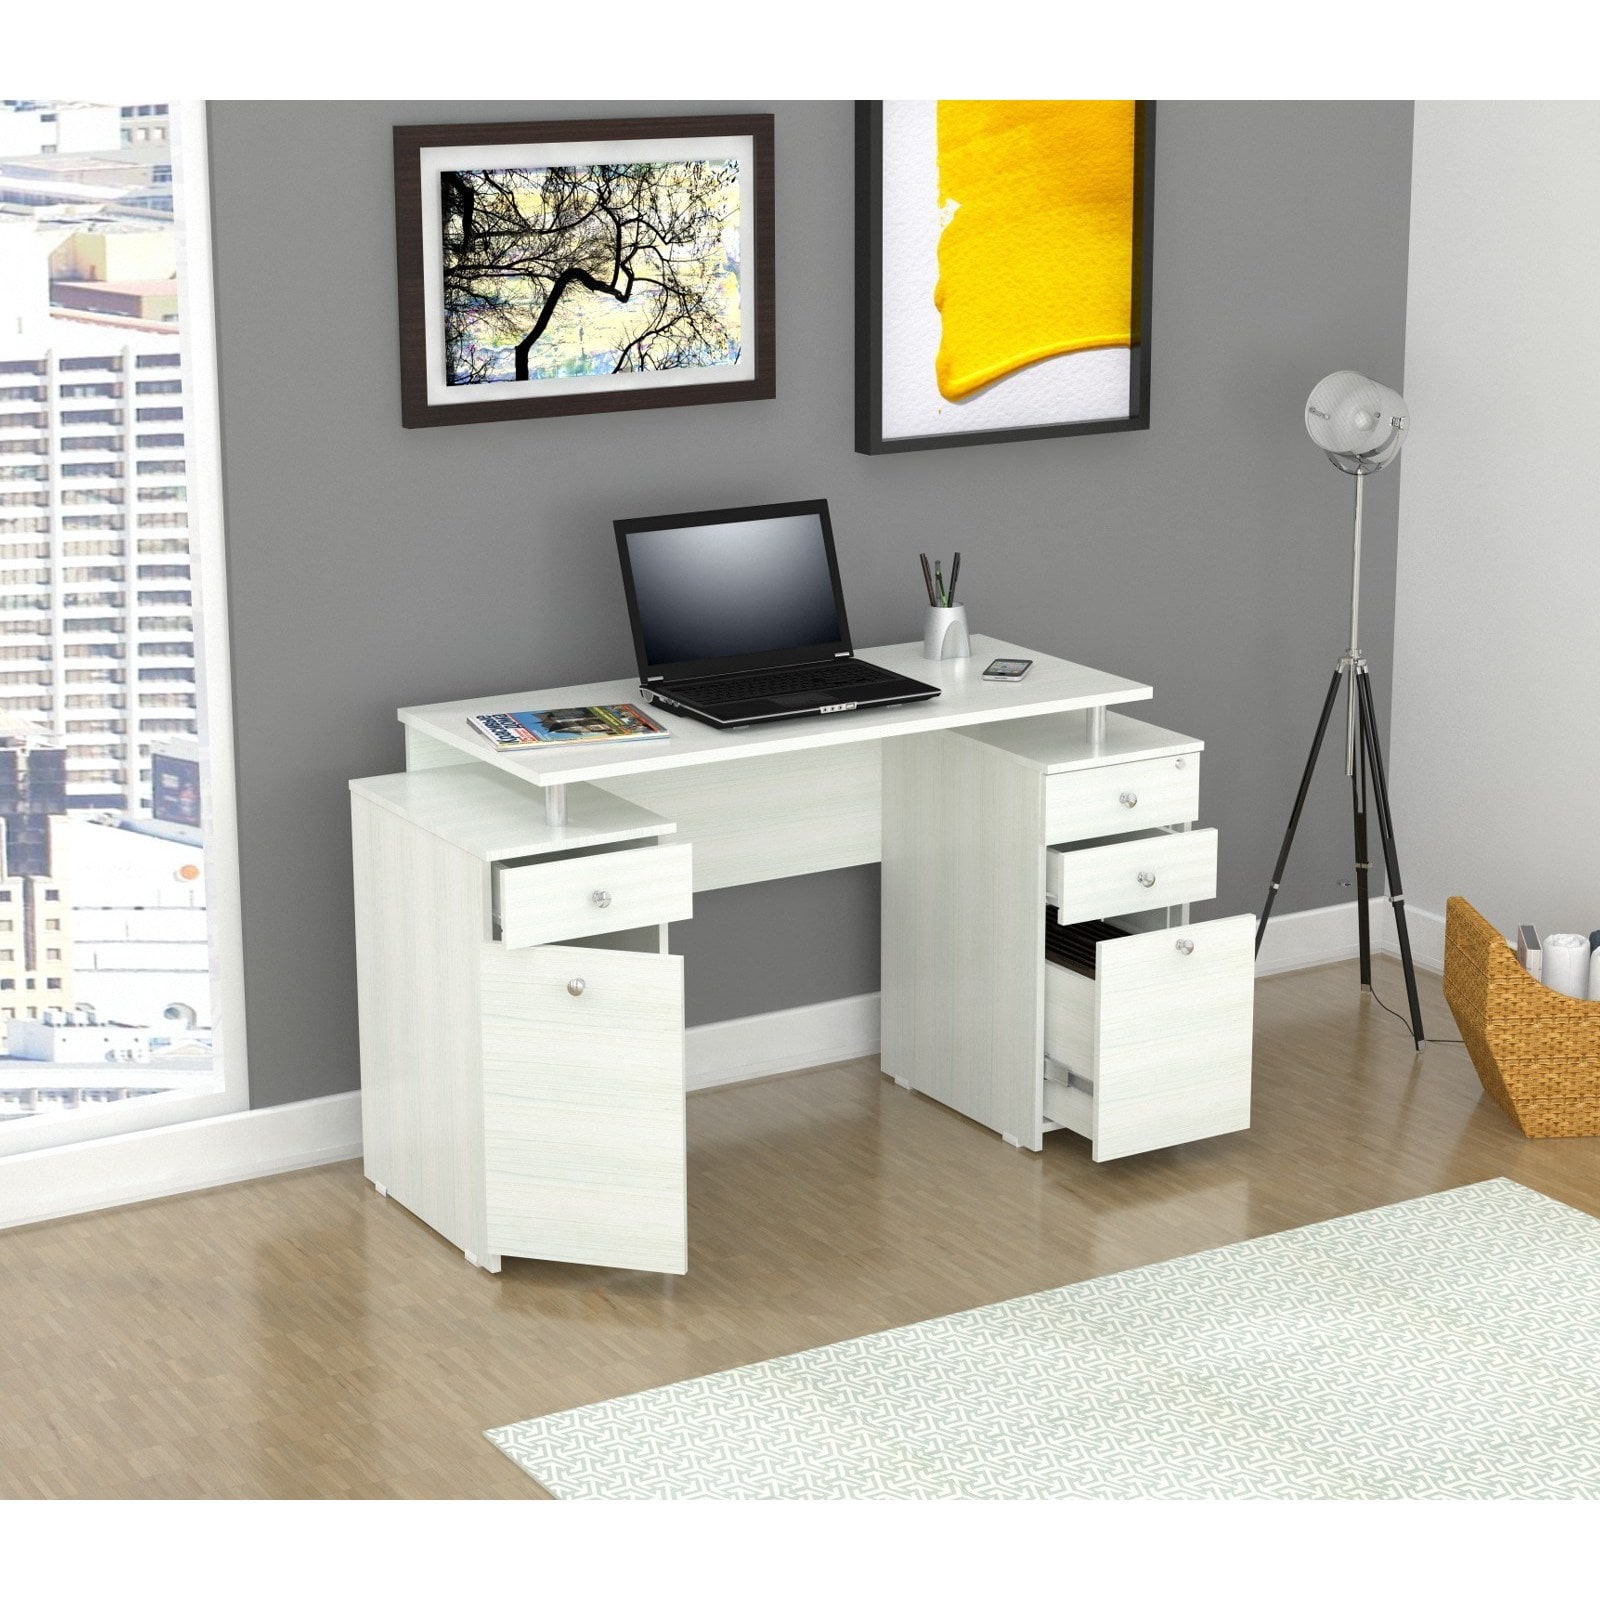 Shop Inval Laricina White Modern Straight Computer Writing Desk with